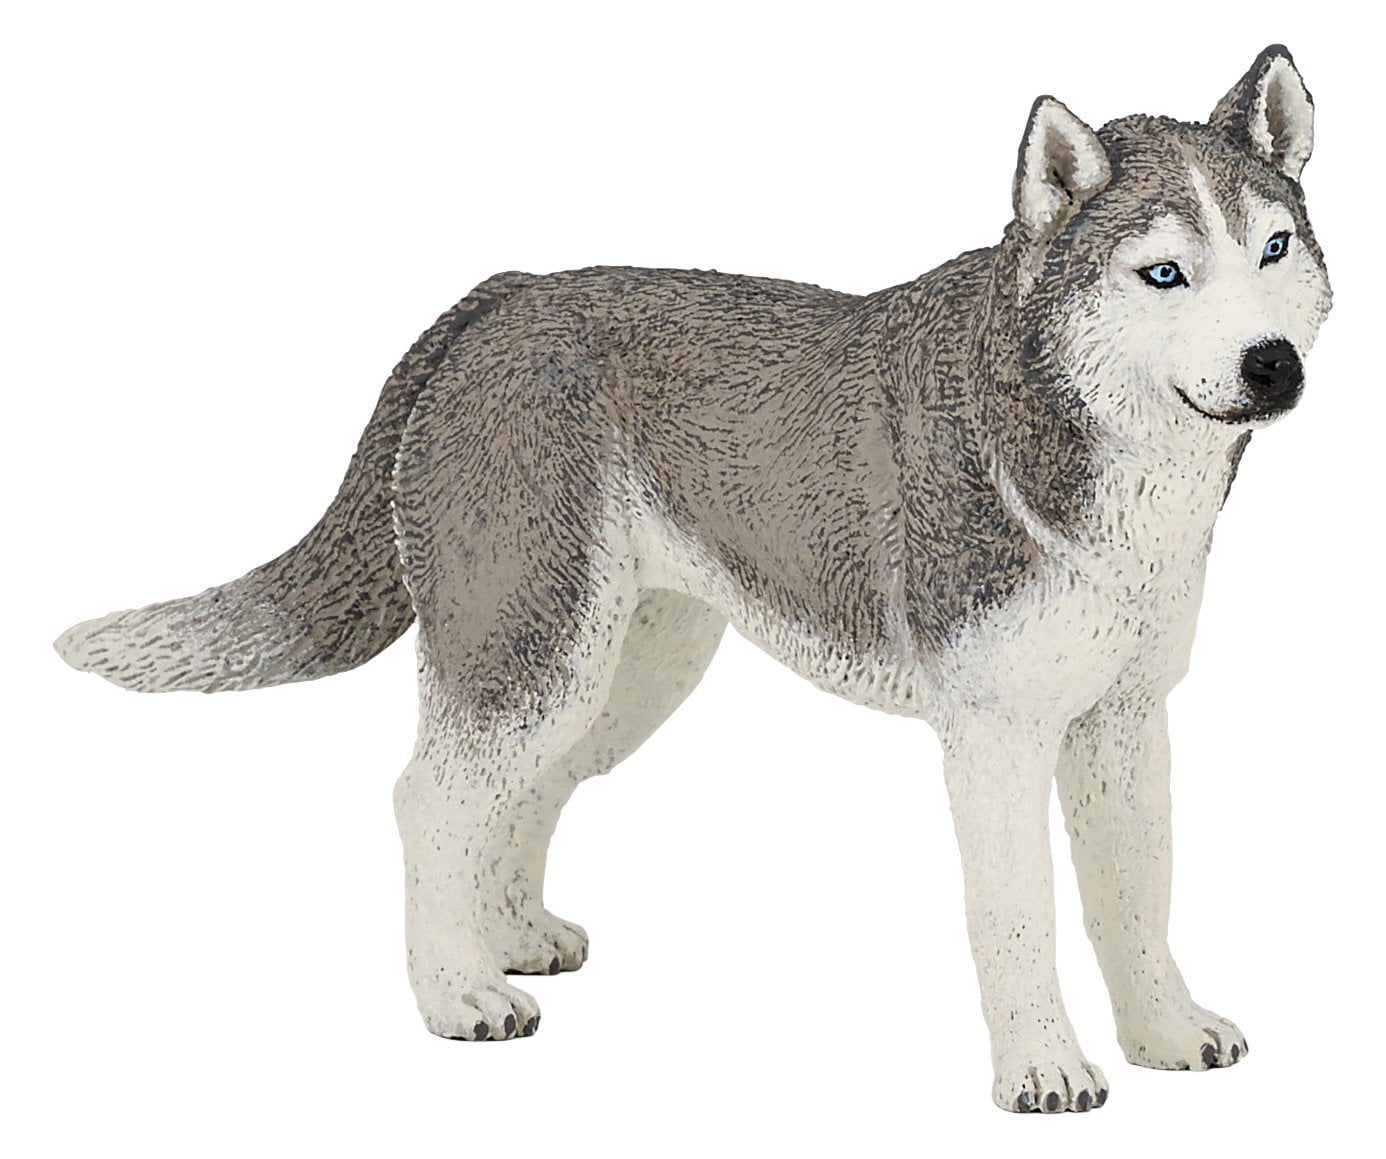 Schleich Husky Animal Figure NEW IN STOCK Educational